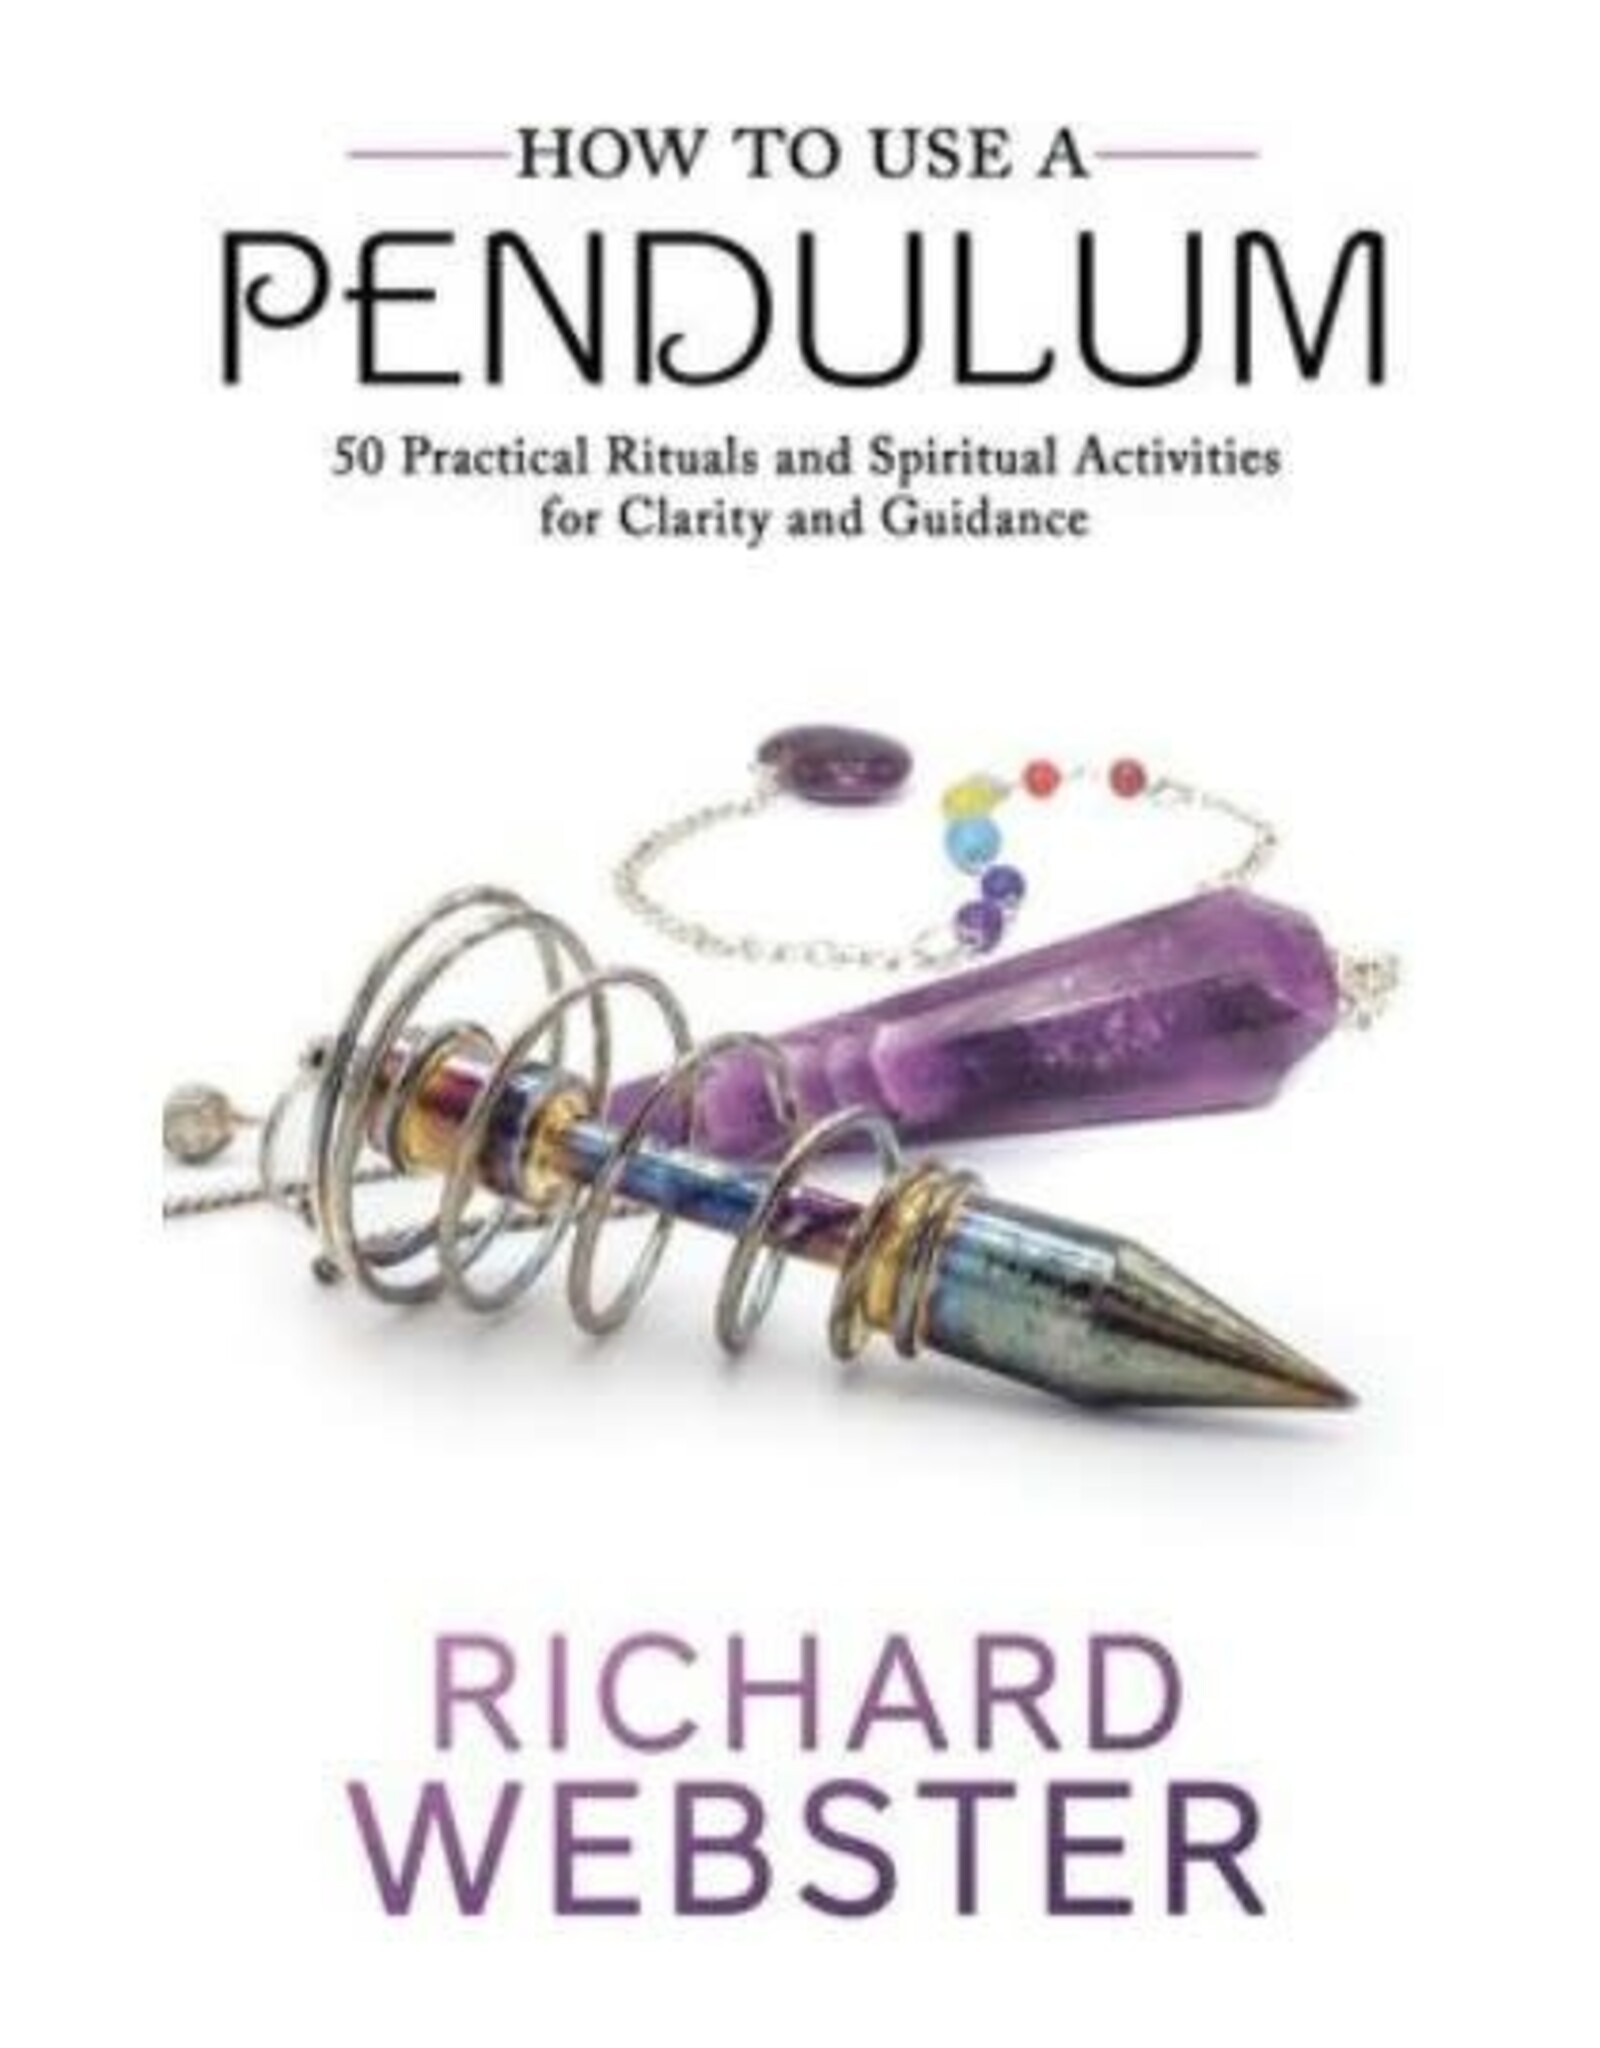 Richard Webster How to Use a Pendulum by Richard Webster